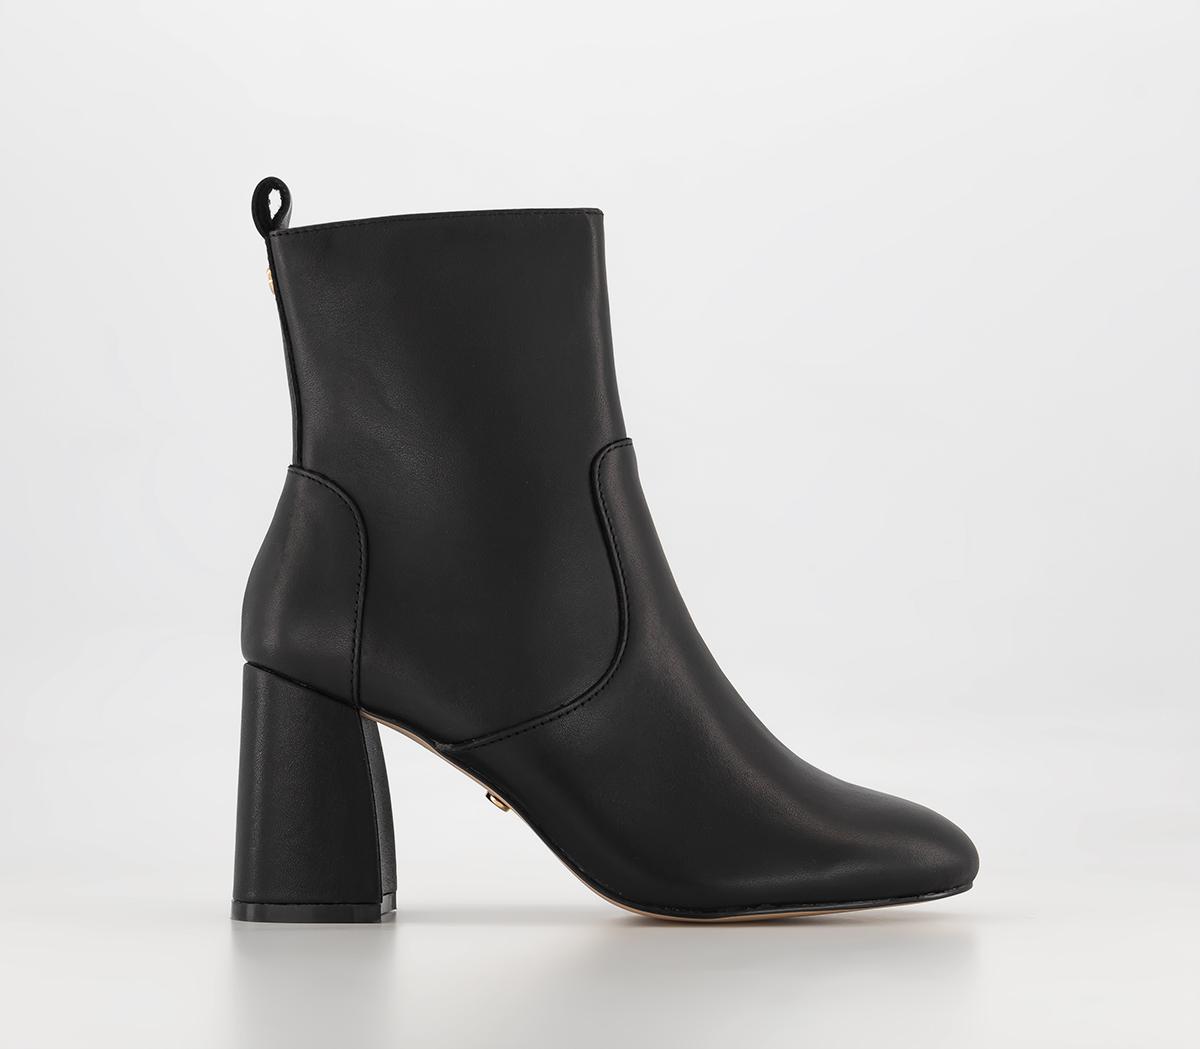 OFFICE Anushka Block Heel Ankle Boots Black Leather - Women's Ankle Boots